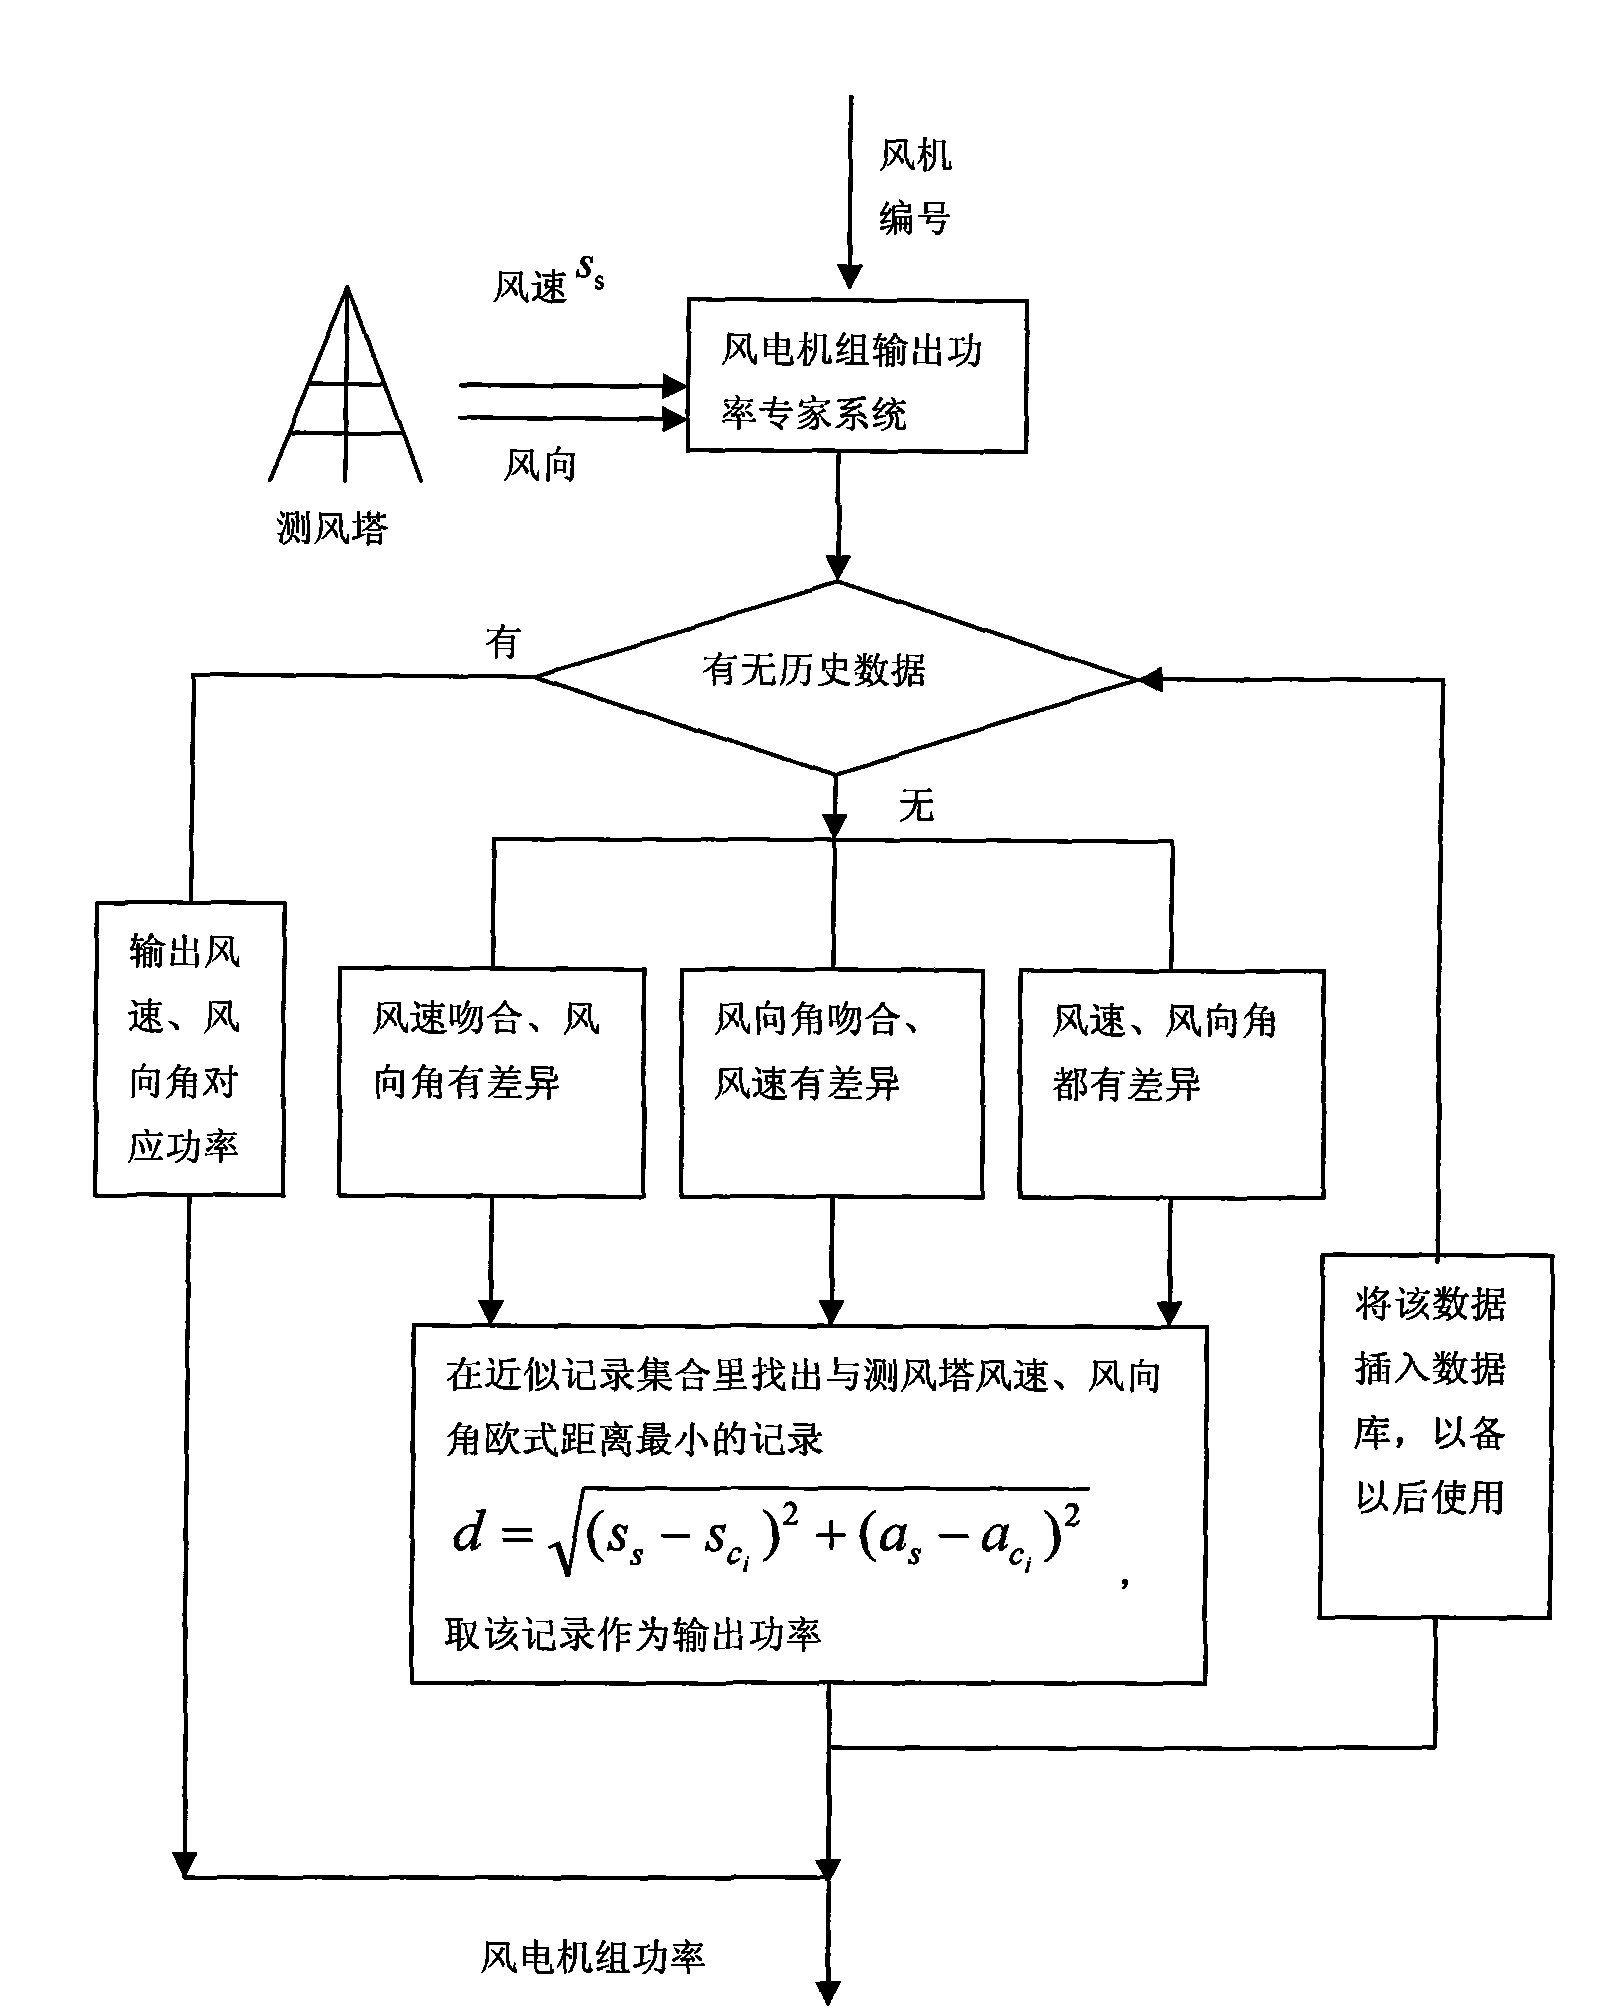 Method for calculating output loss of wind power field and unit